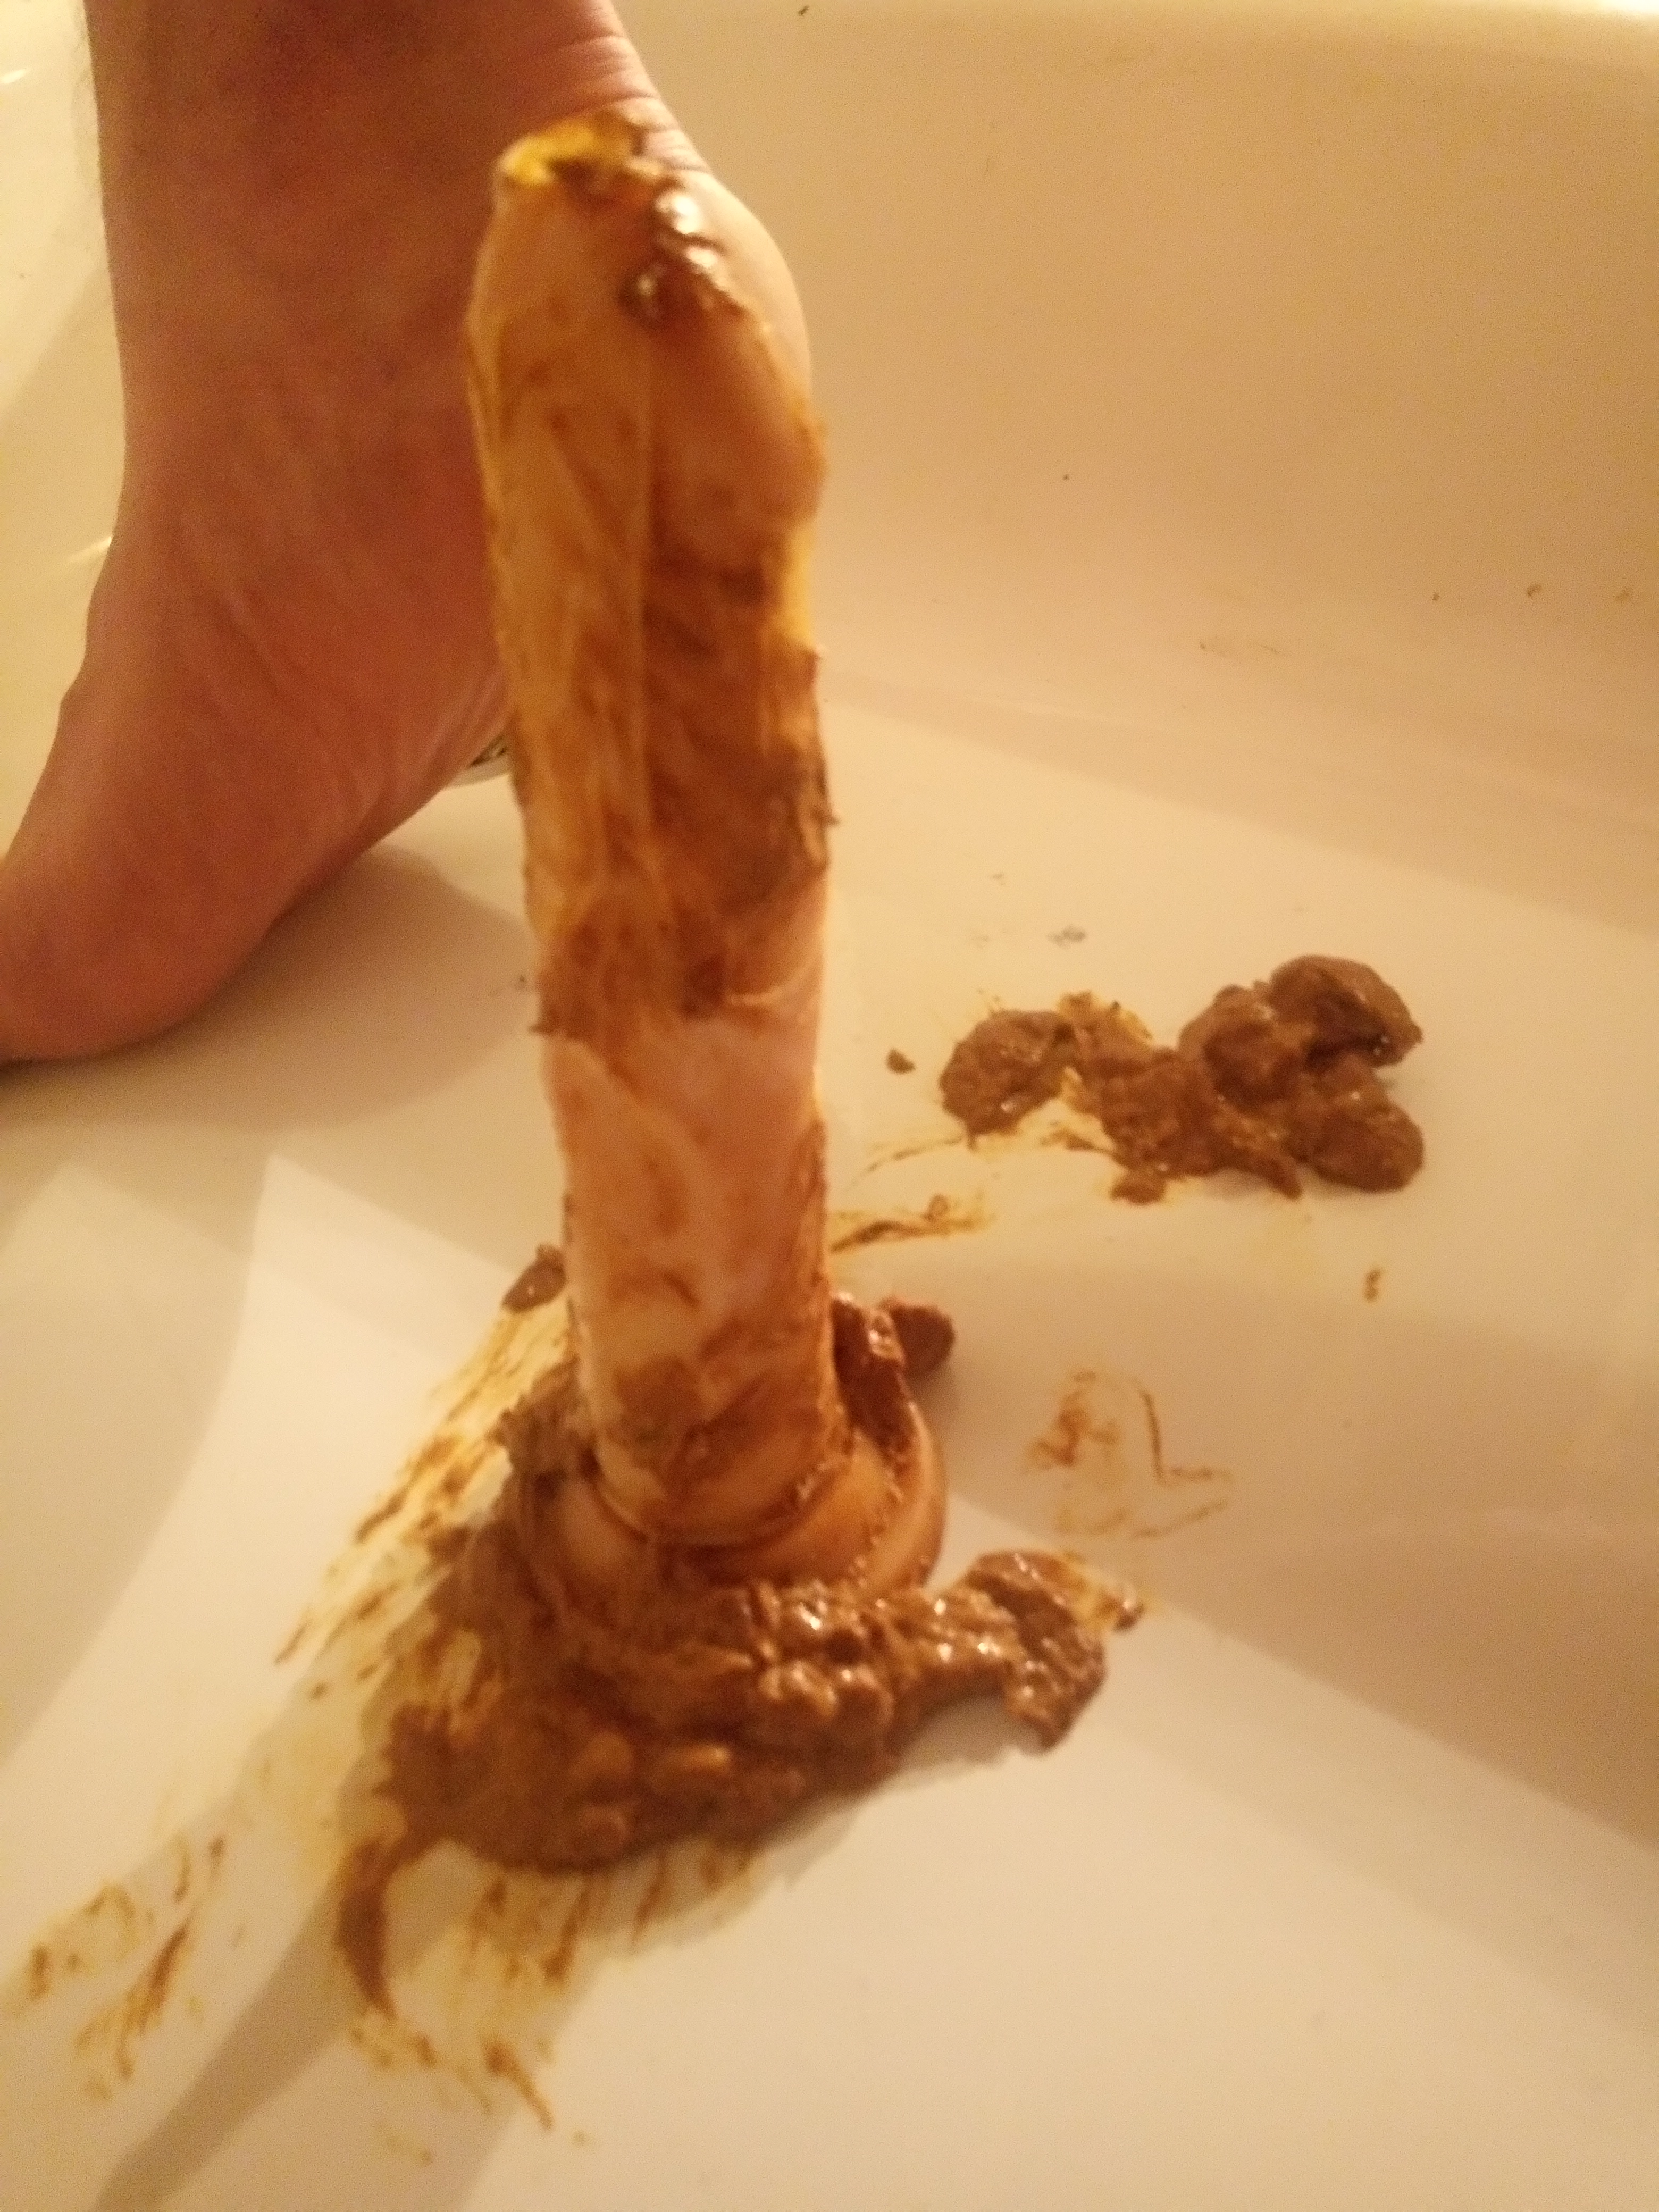 Shitting while playing a dildo in my ass